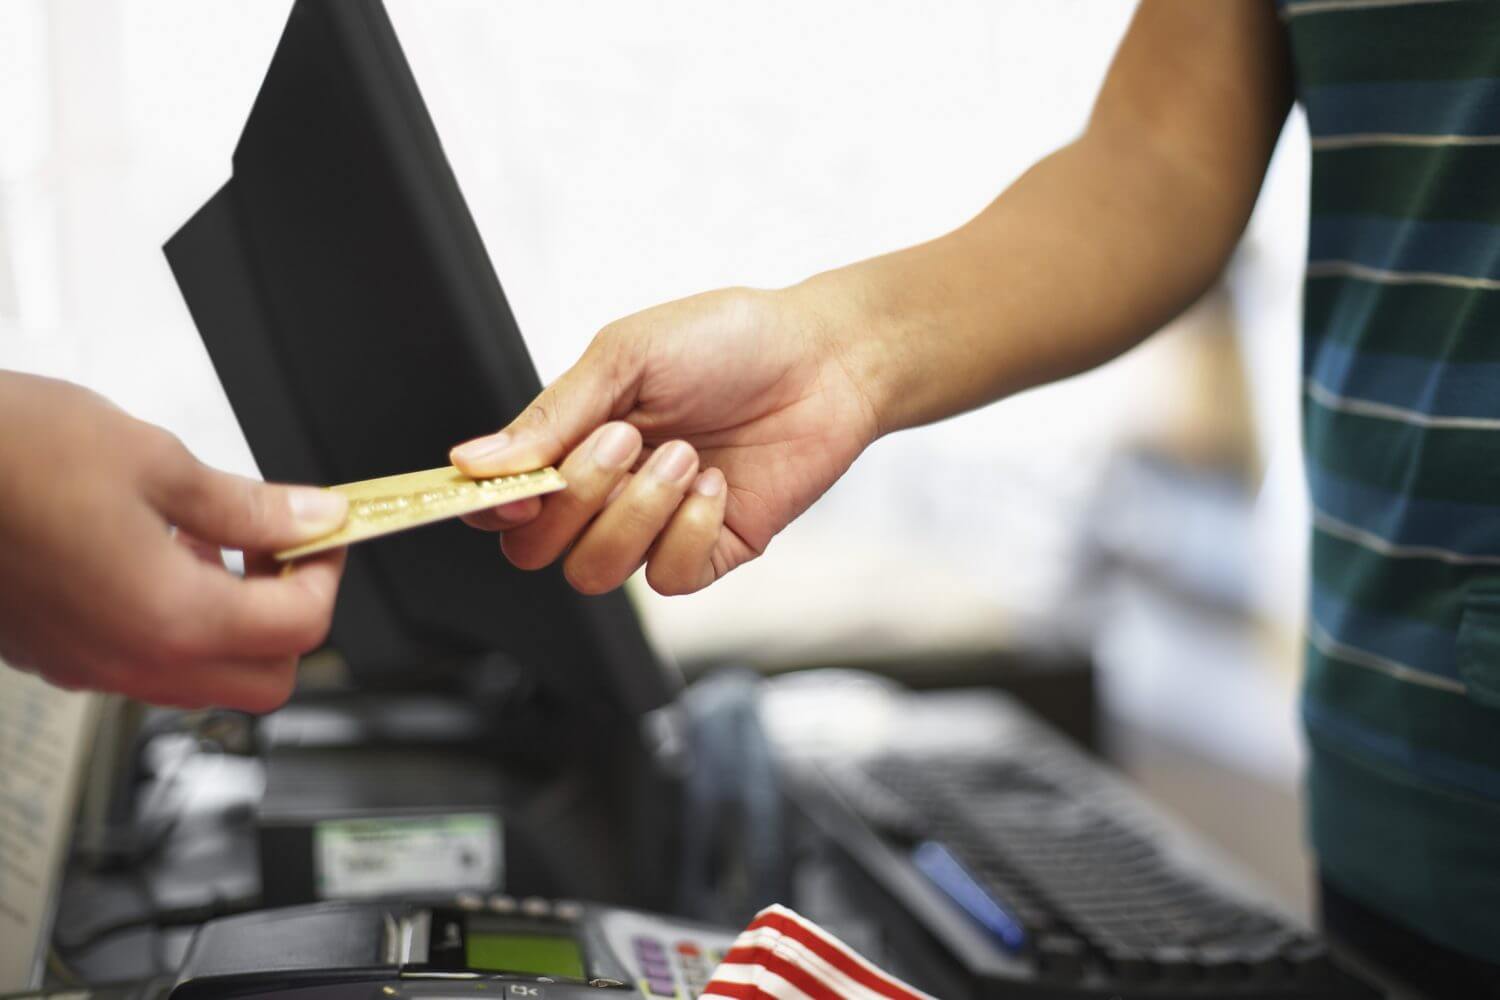 Woman Making a Credit Card Purchase